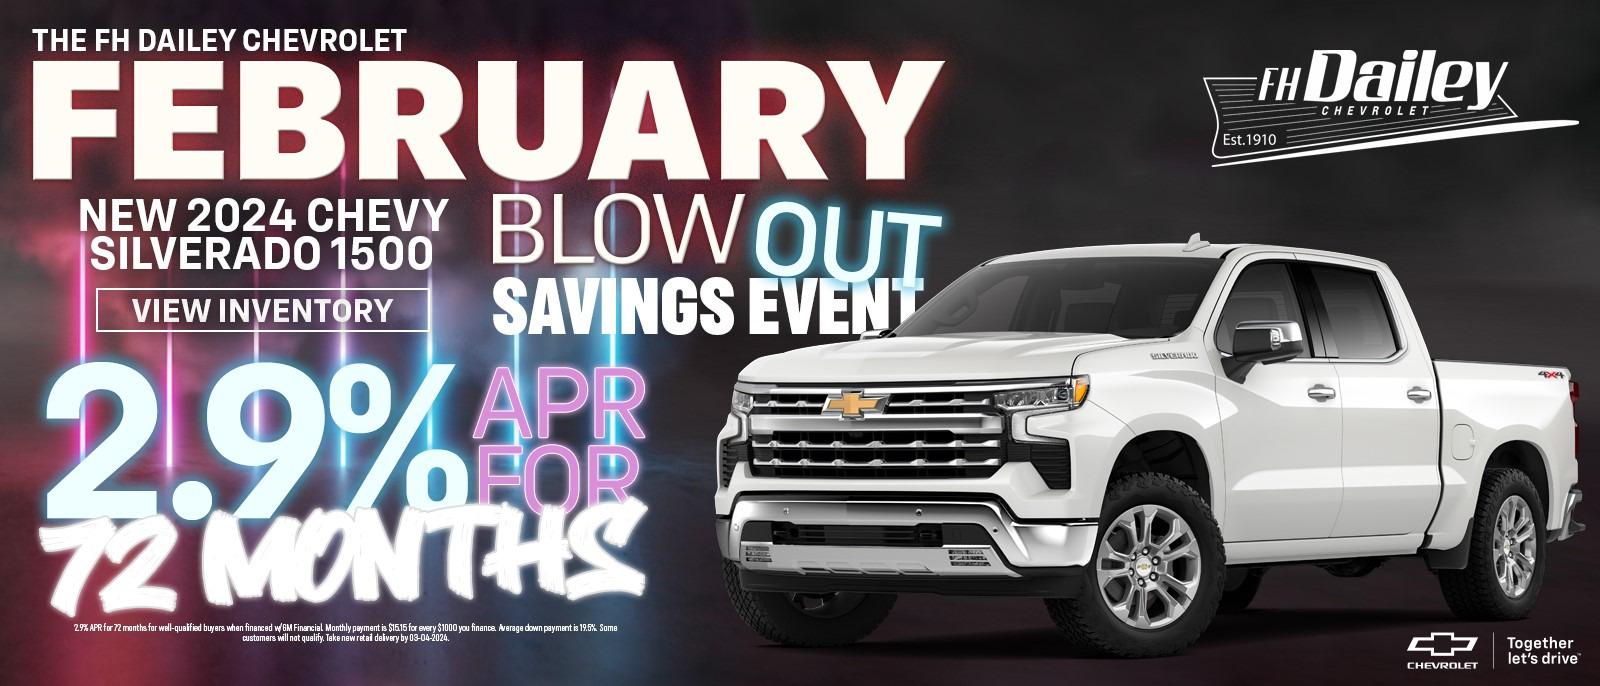 Blow Out Savings event! 2.9% for 72 months!